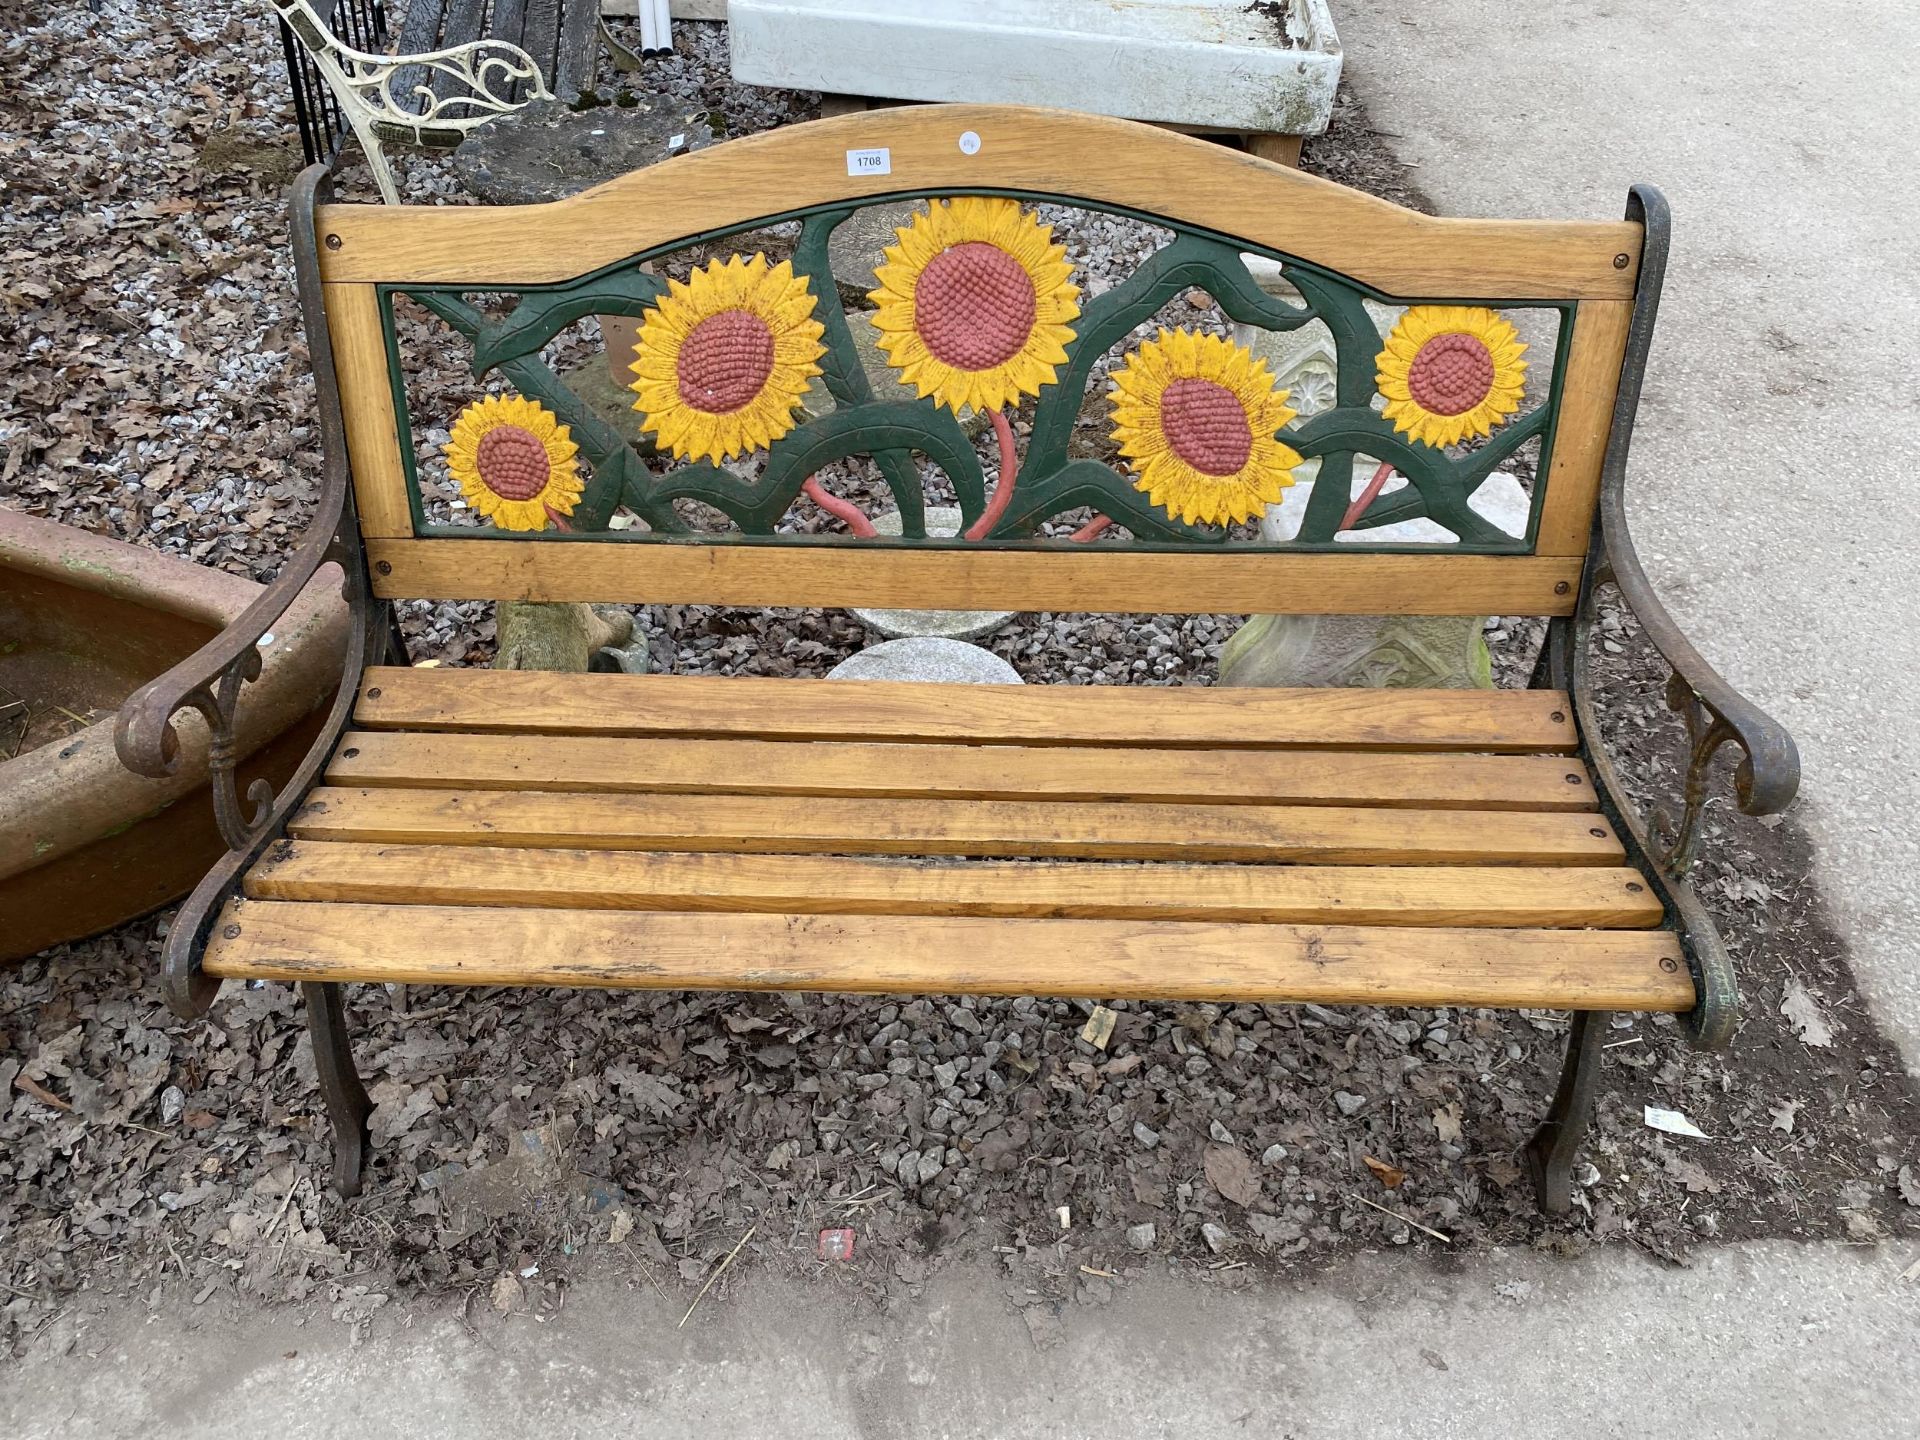 A WOODEN SLATTED GARDEN BENCH WITH CAST BENCH ENDS AND CAST SUNFLOWER DESIGN BACK